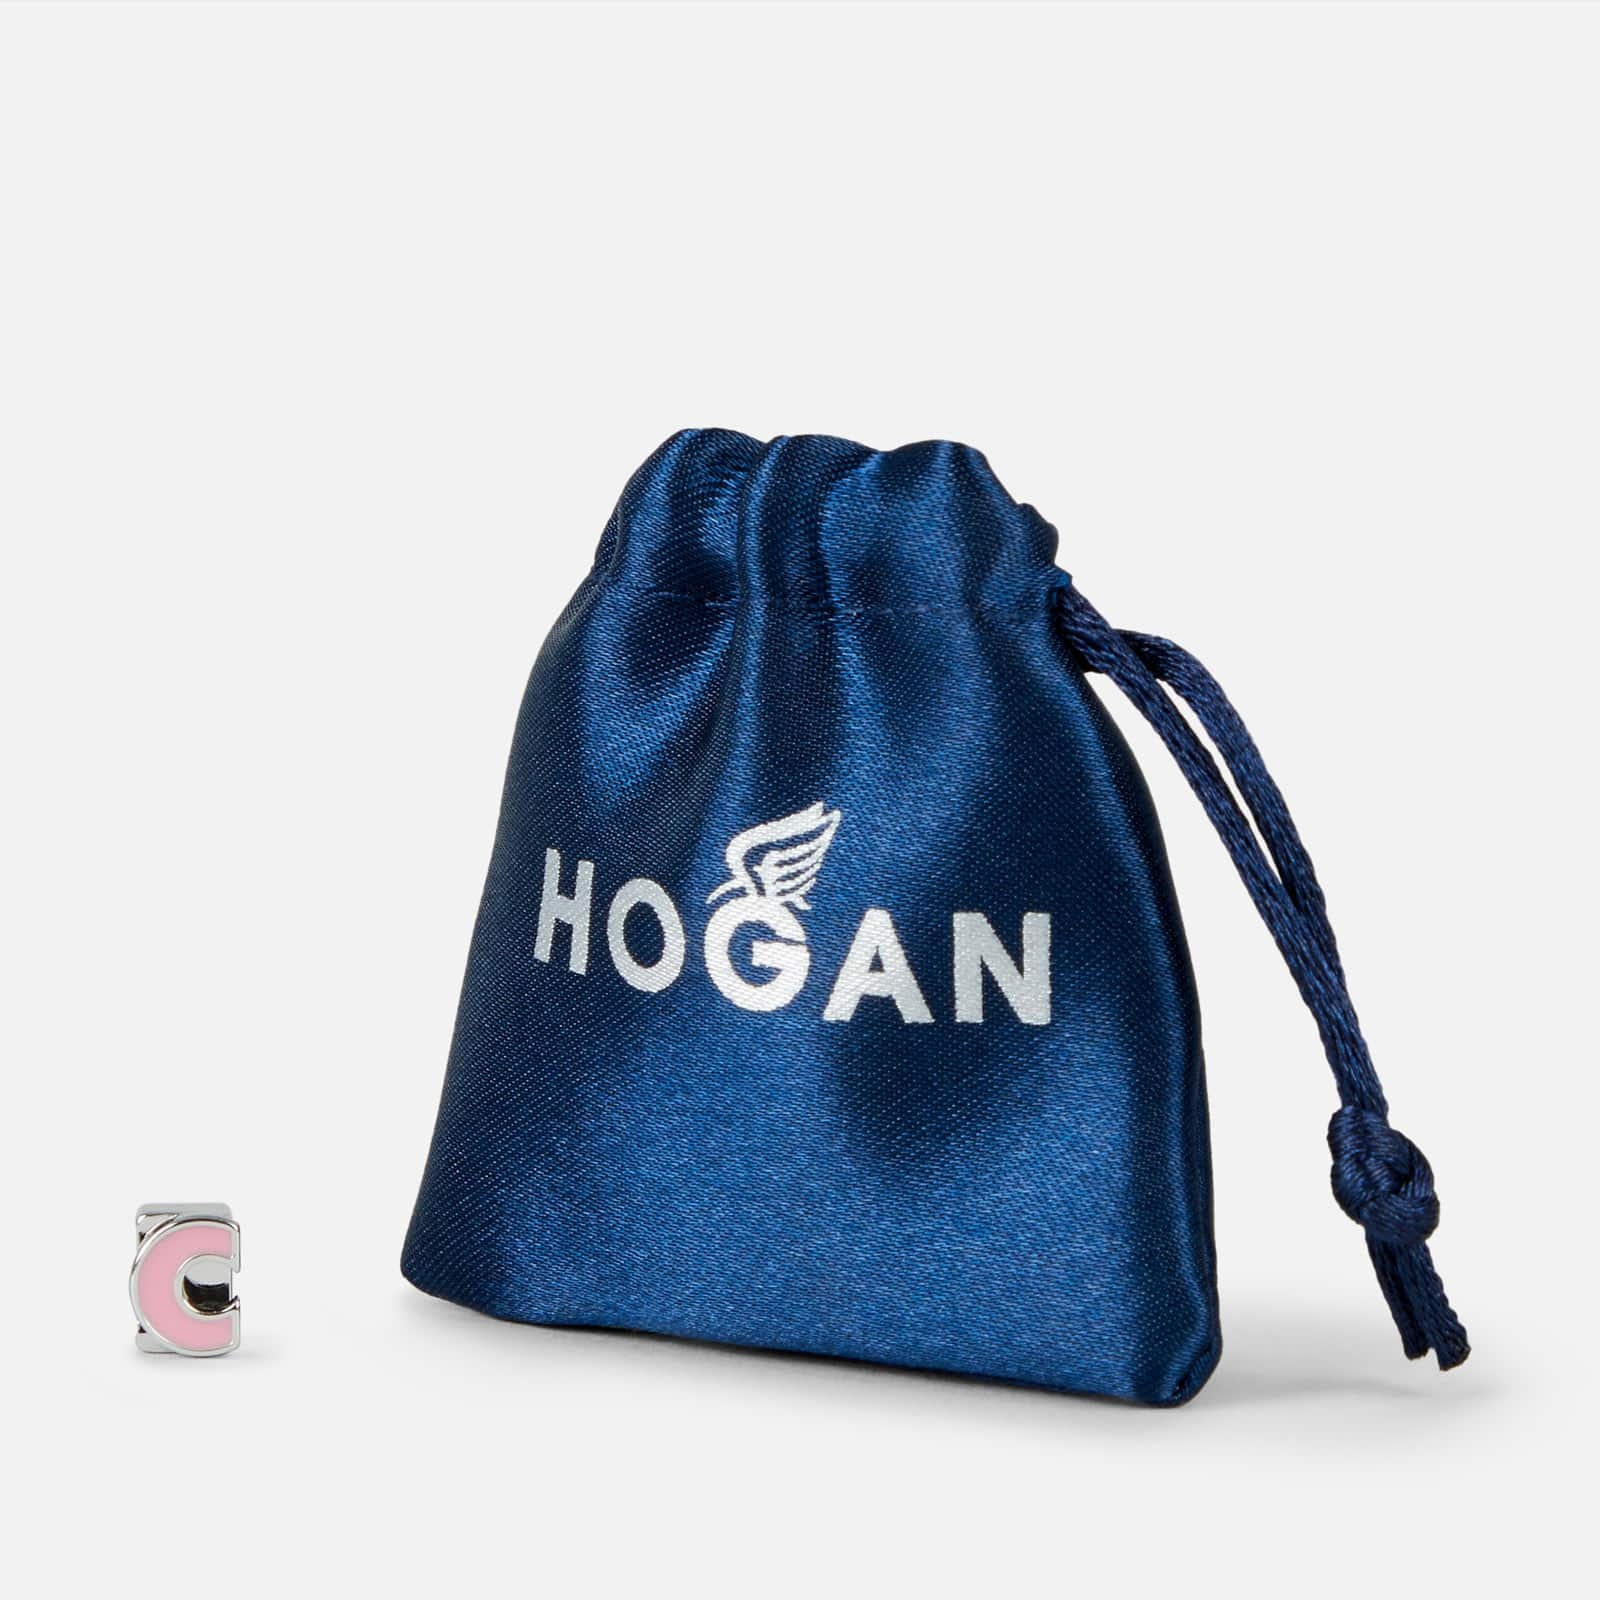 Hogan By You - Shoelace Bead Pink Gold Violet - 2